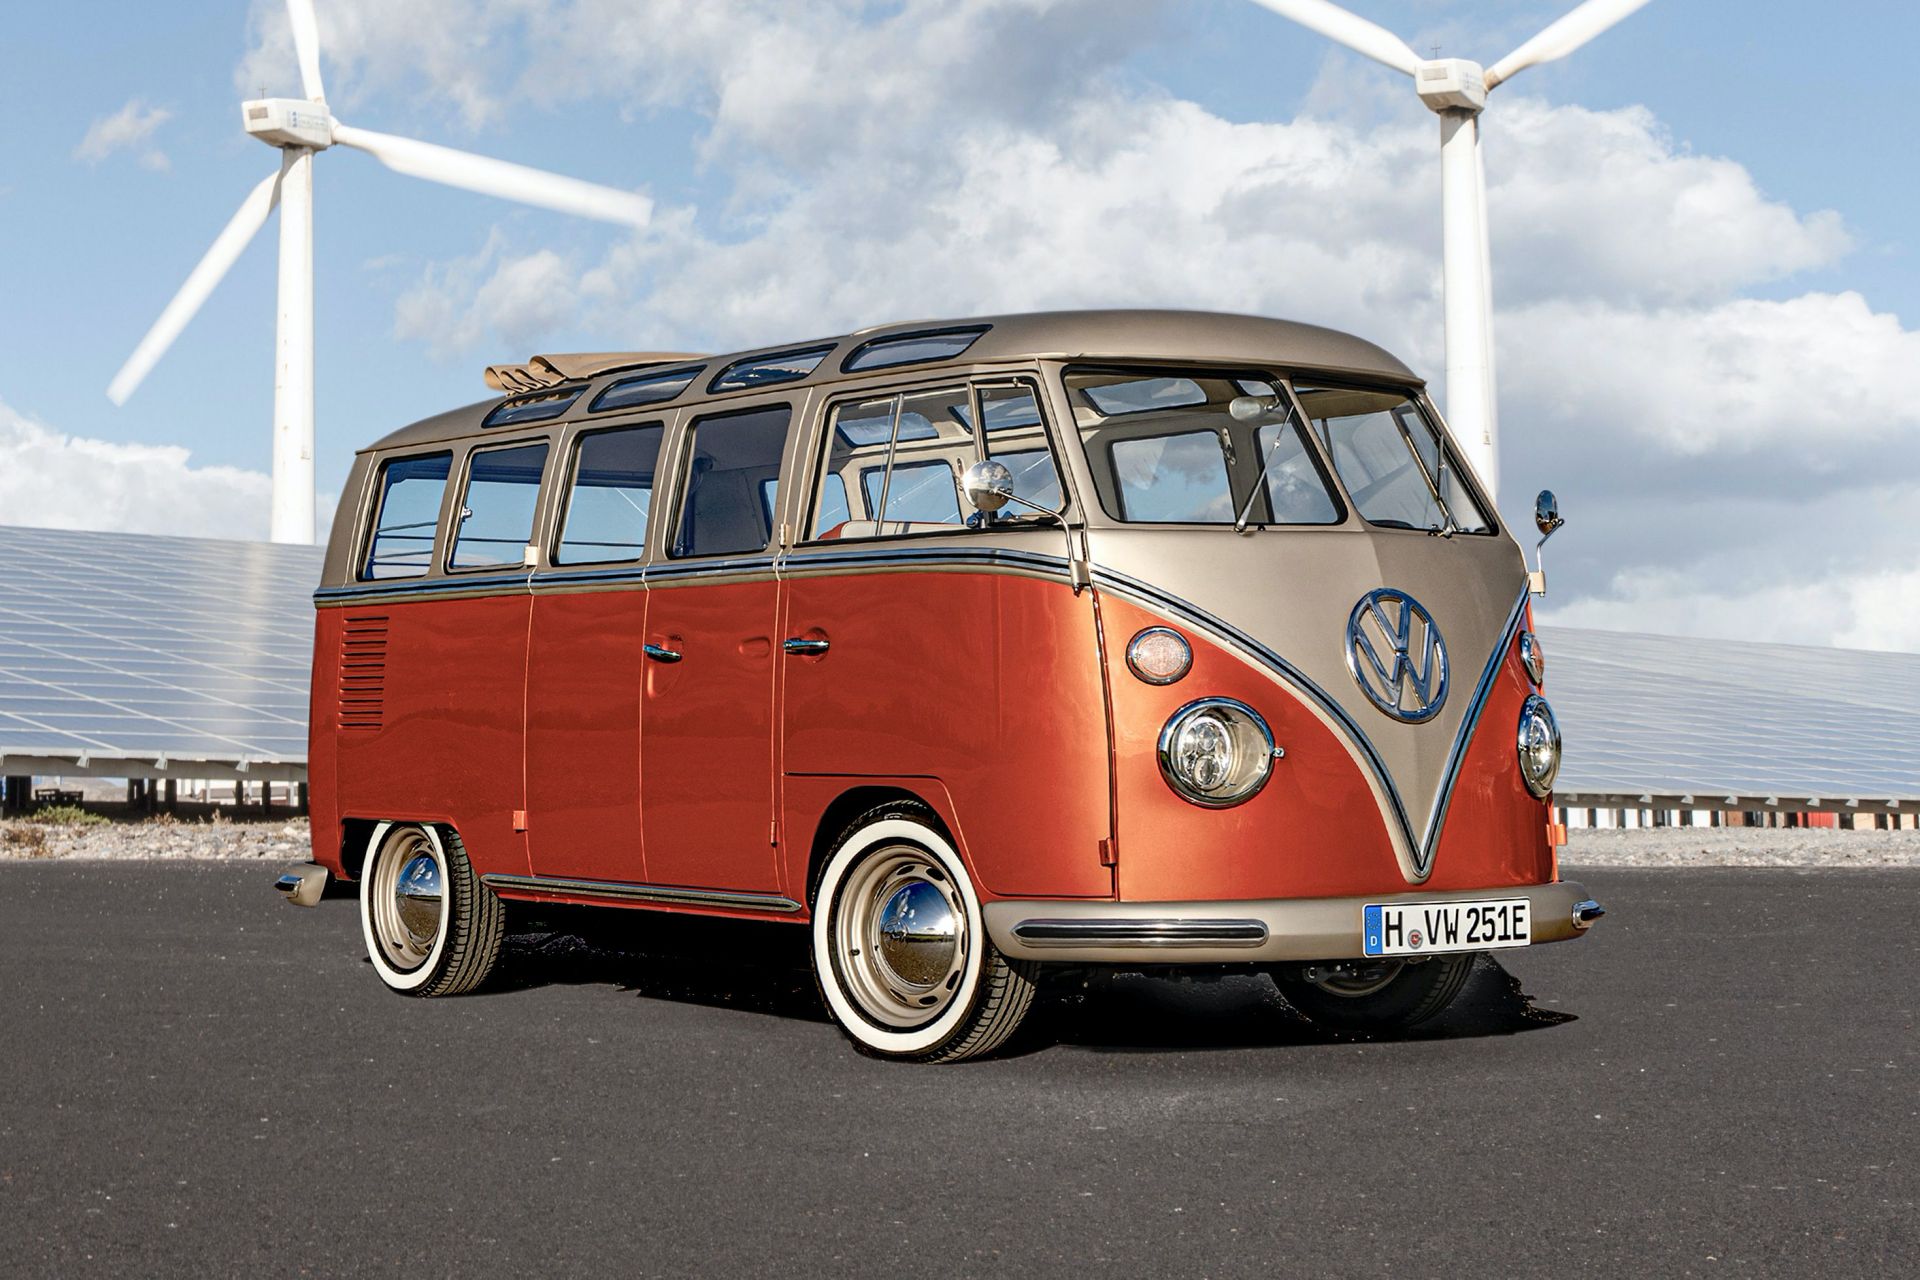 Volkswagen was supposed to launch its all electric e Bulli T1 bus at the Techno Classica but 